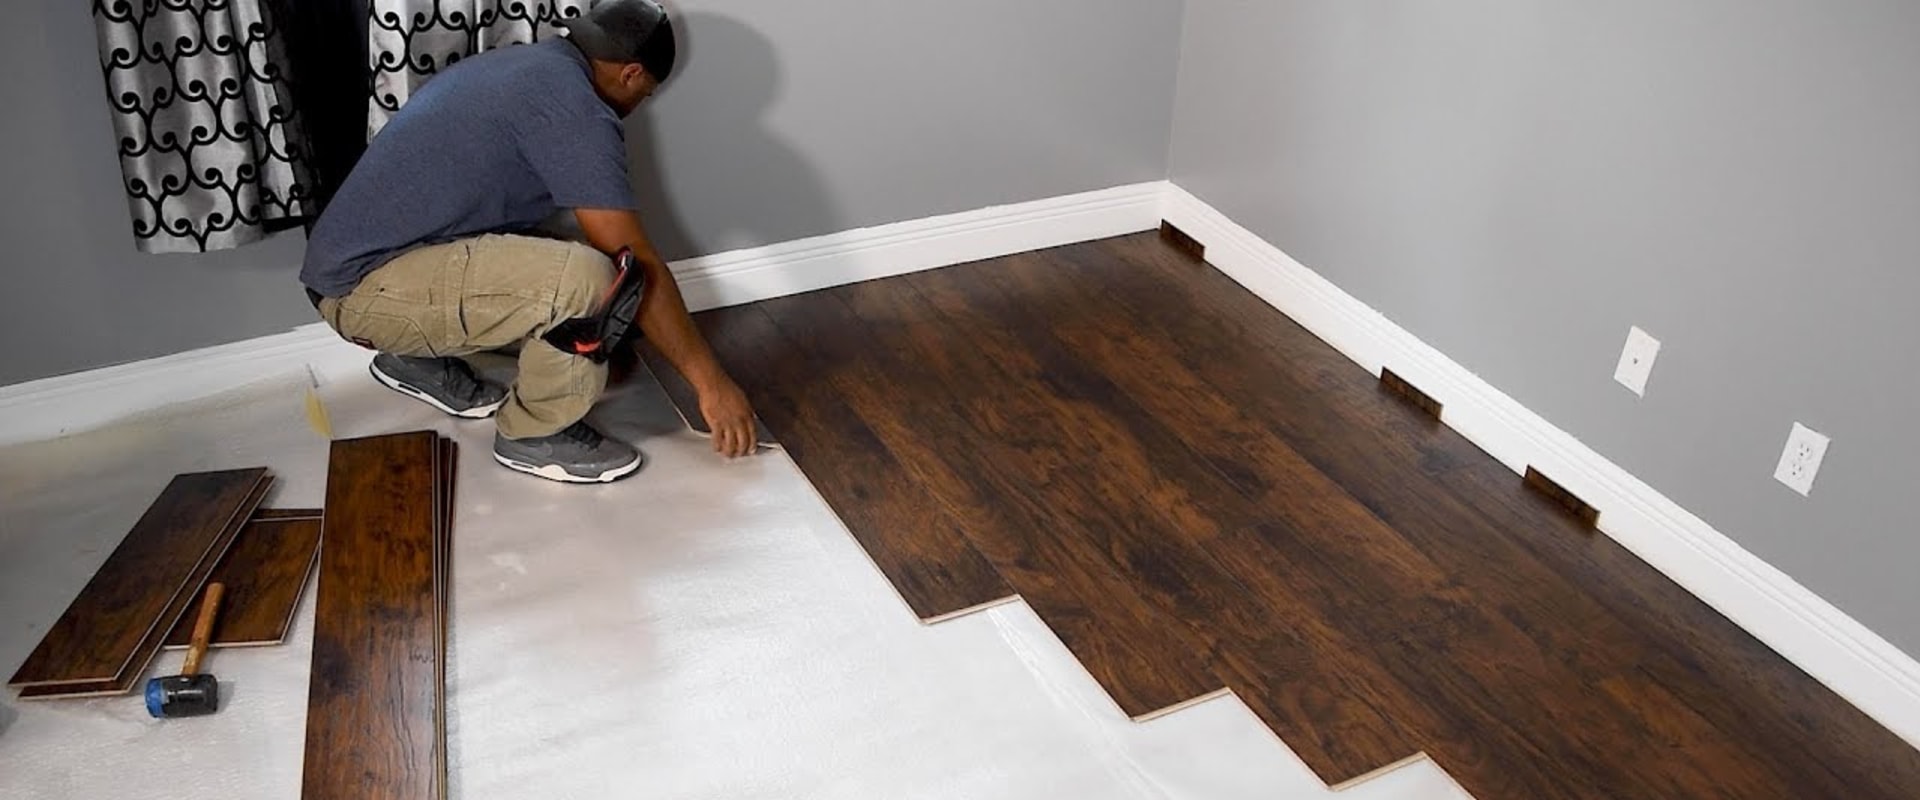 Laying the Flooring: A Step-by-Step Guide